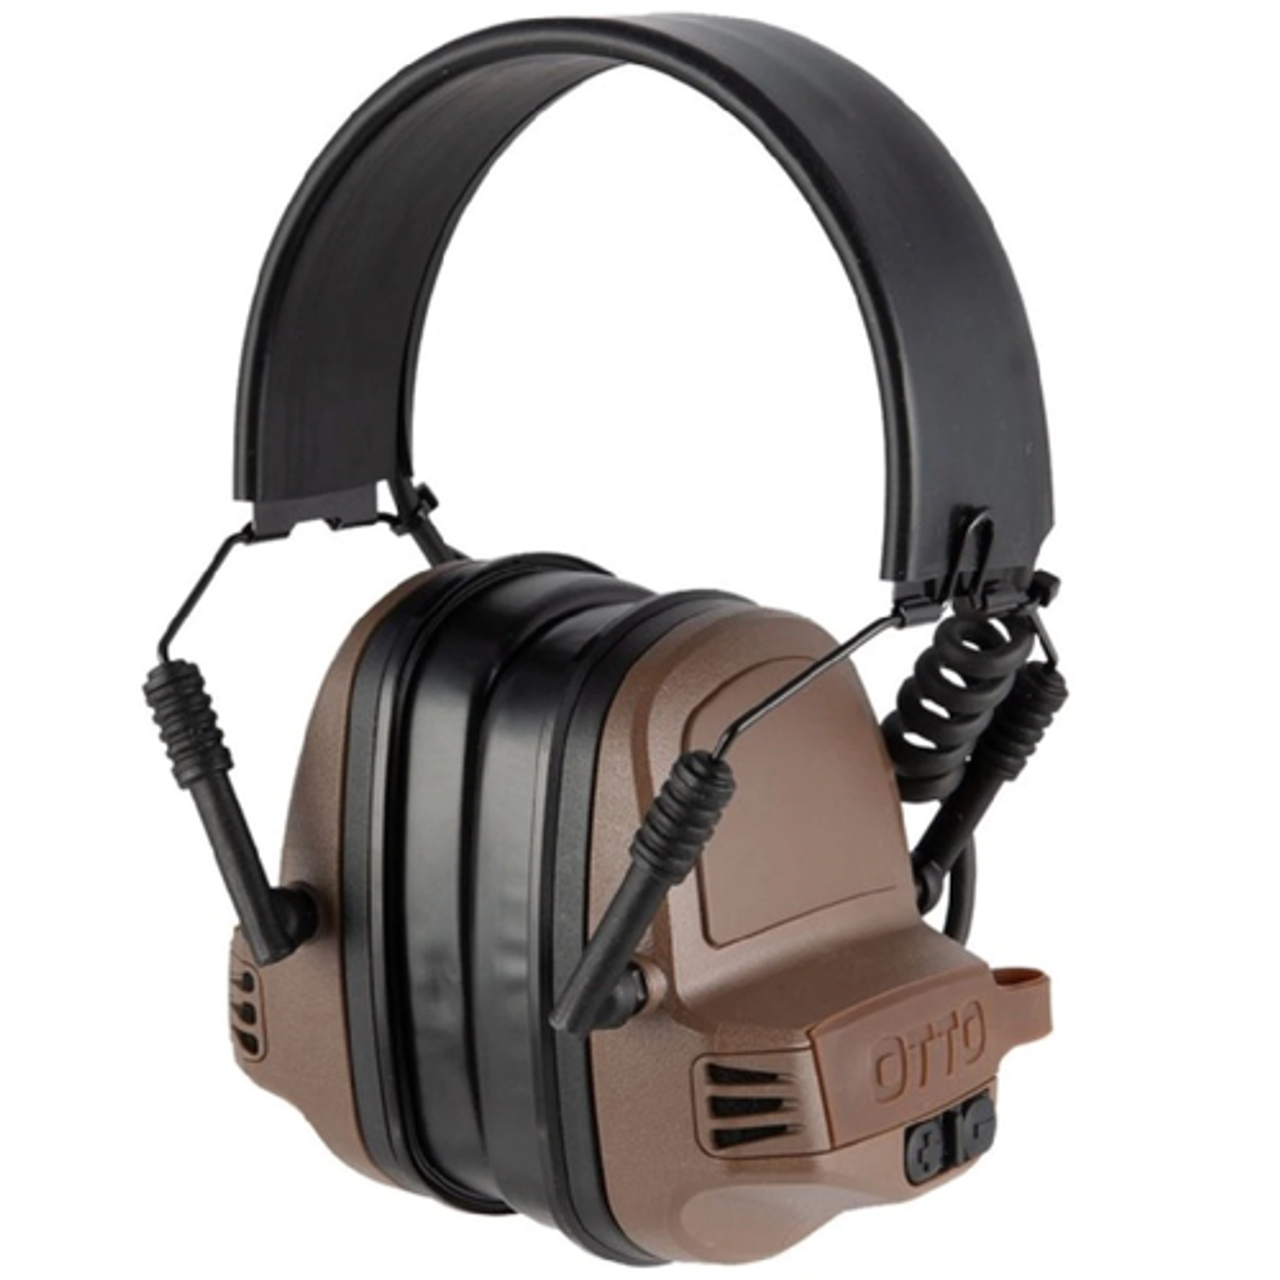 Store Over Head HiTech Way SA - Headset Radio Two V4-11072FD Tactical Business OTTO Range the - NoizeBarrier Wireless